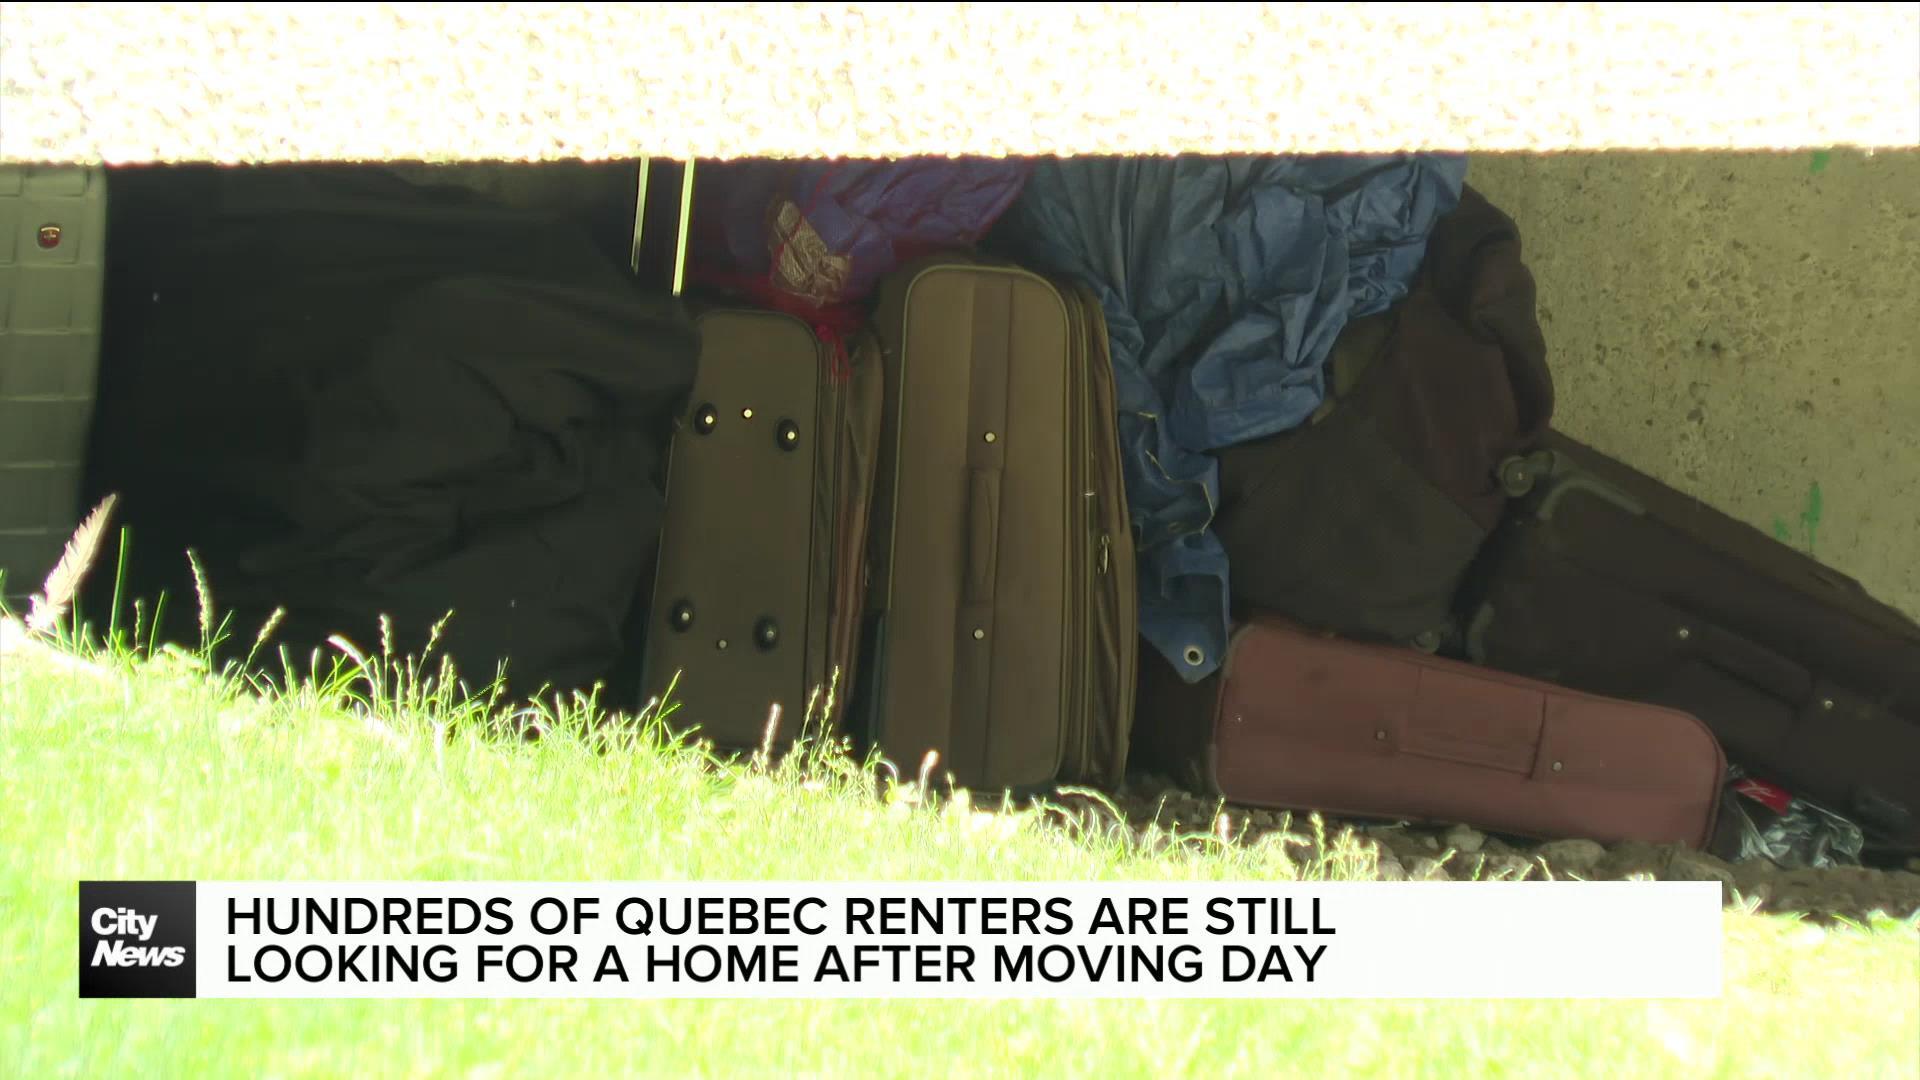 Montreal renters still looking for a place to live after moving day